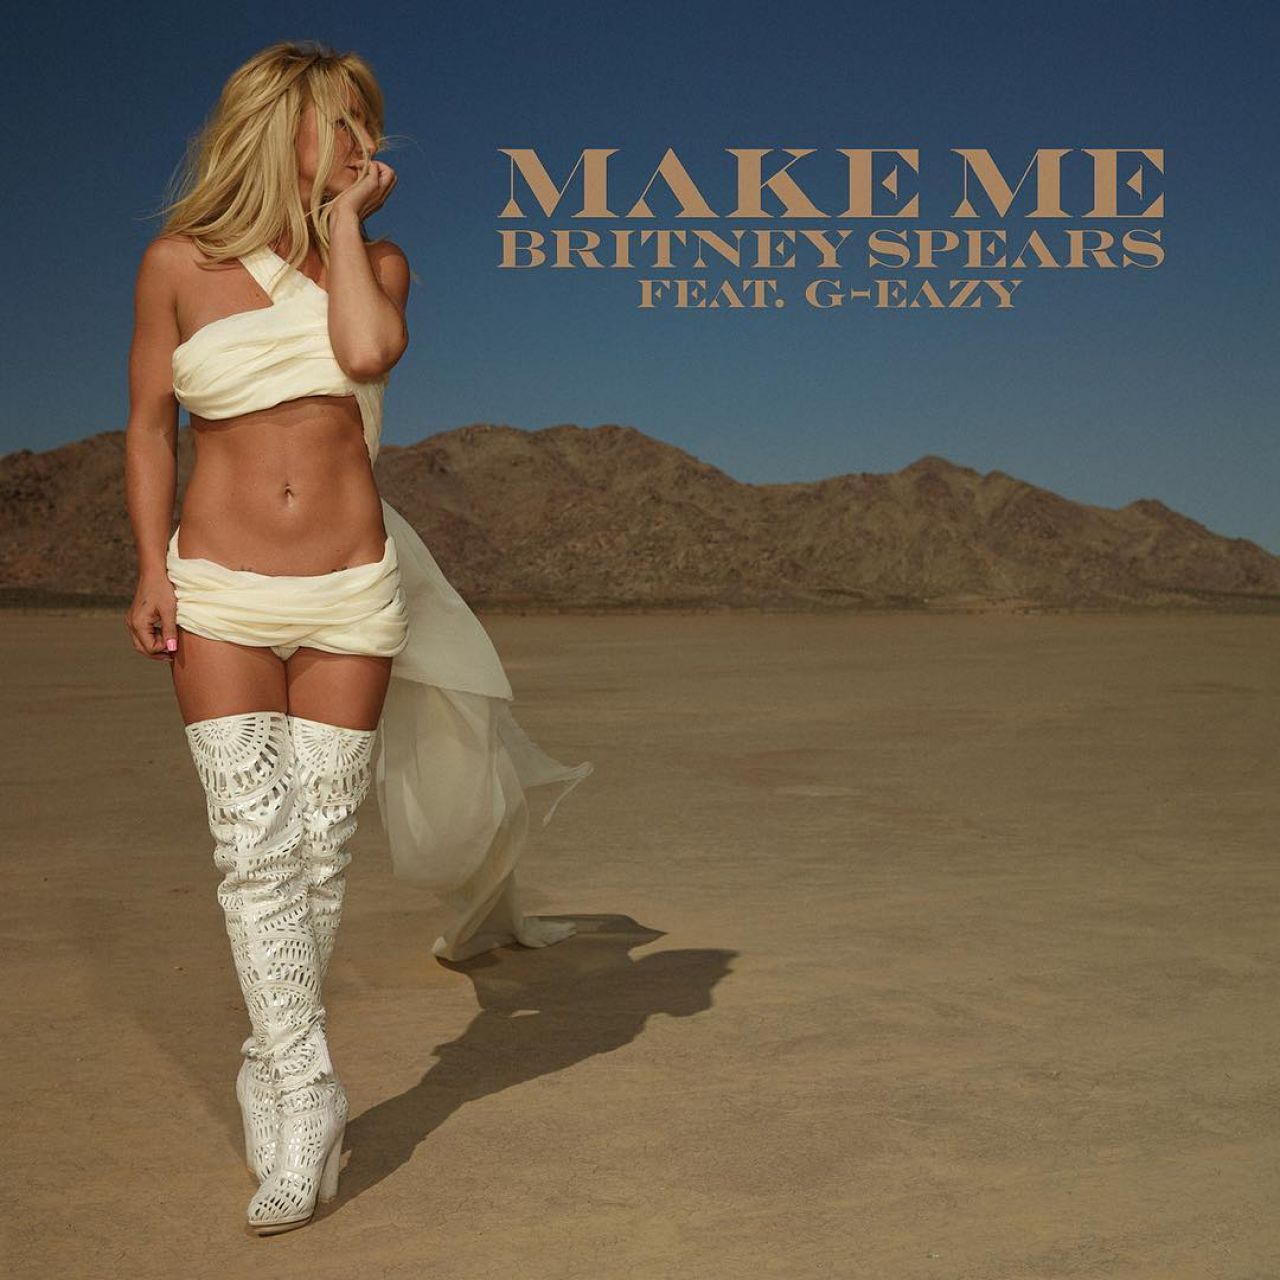 britney-spears-make-me-single-cover-and-